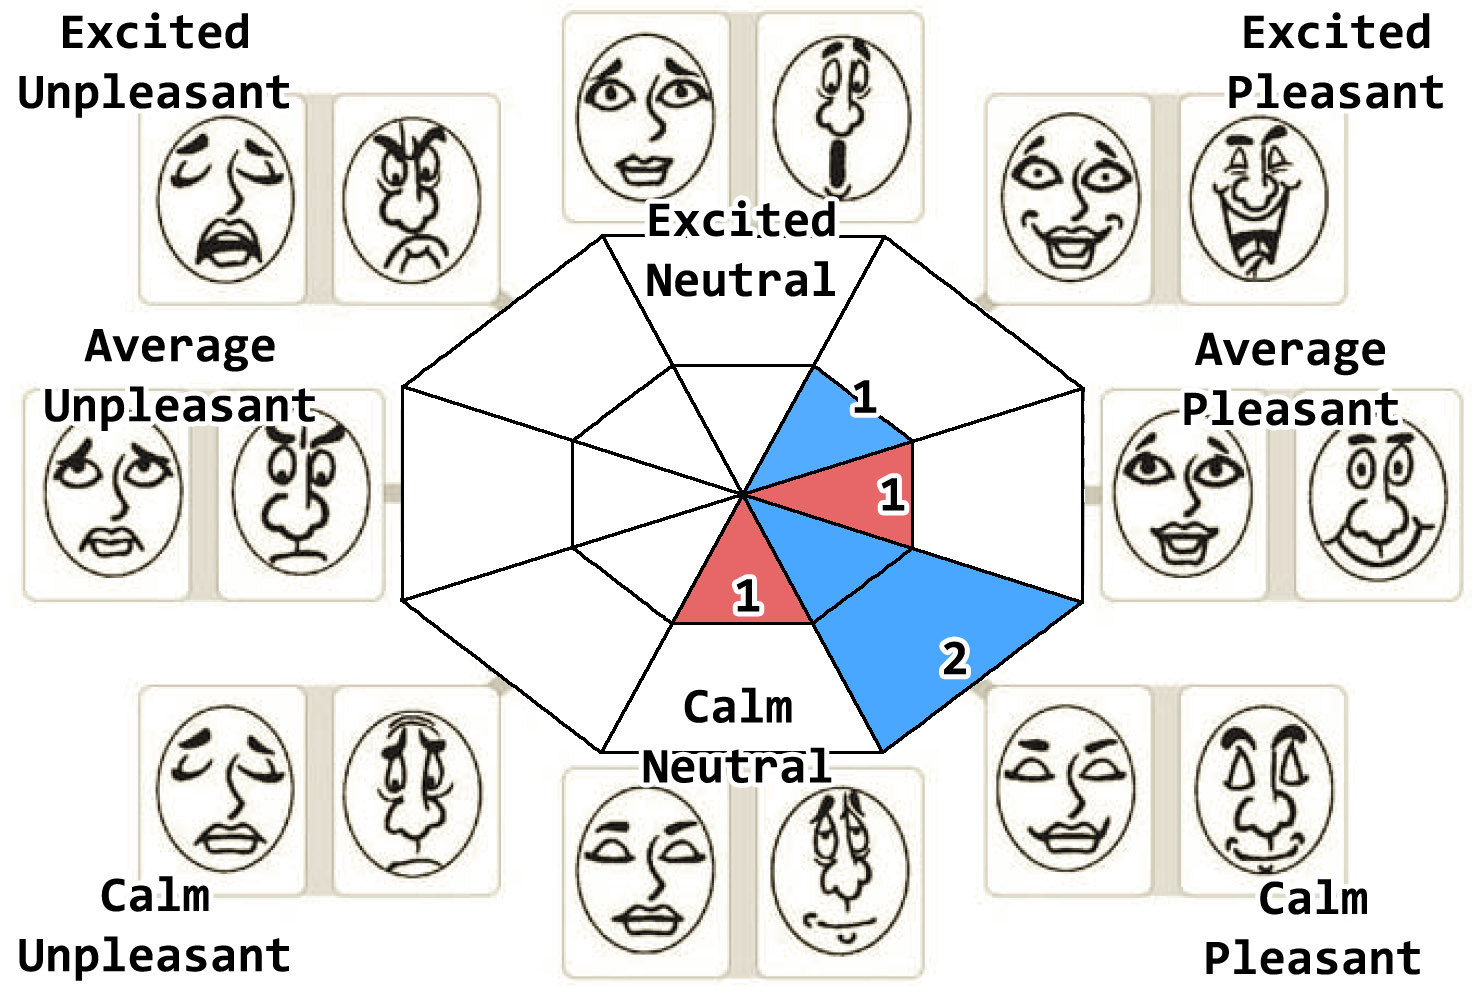 
                                                        Results of the users emotional state while using the interface.